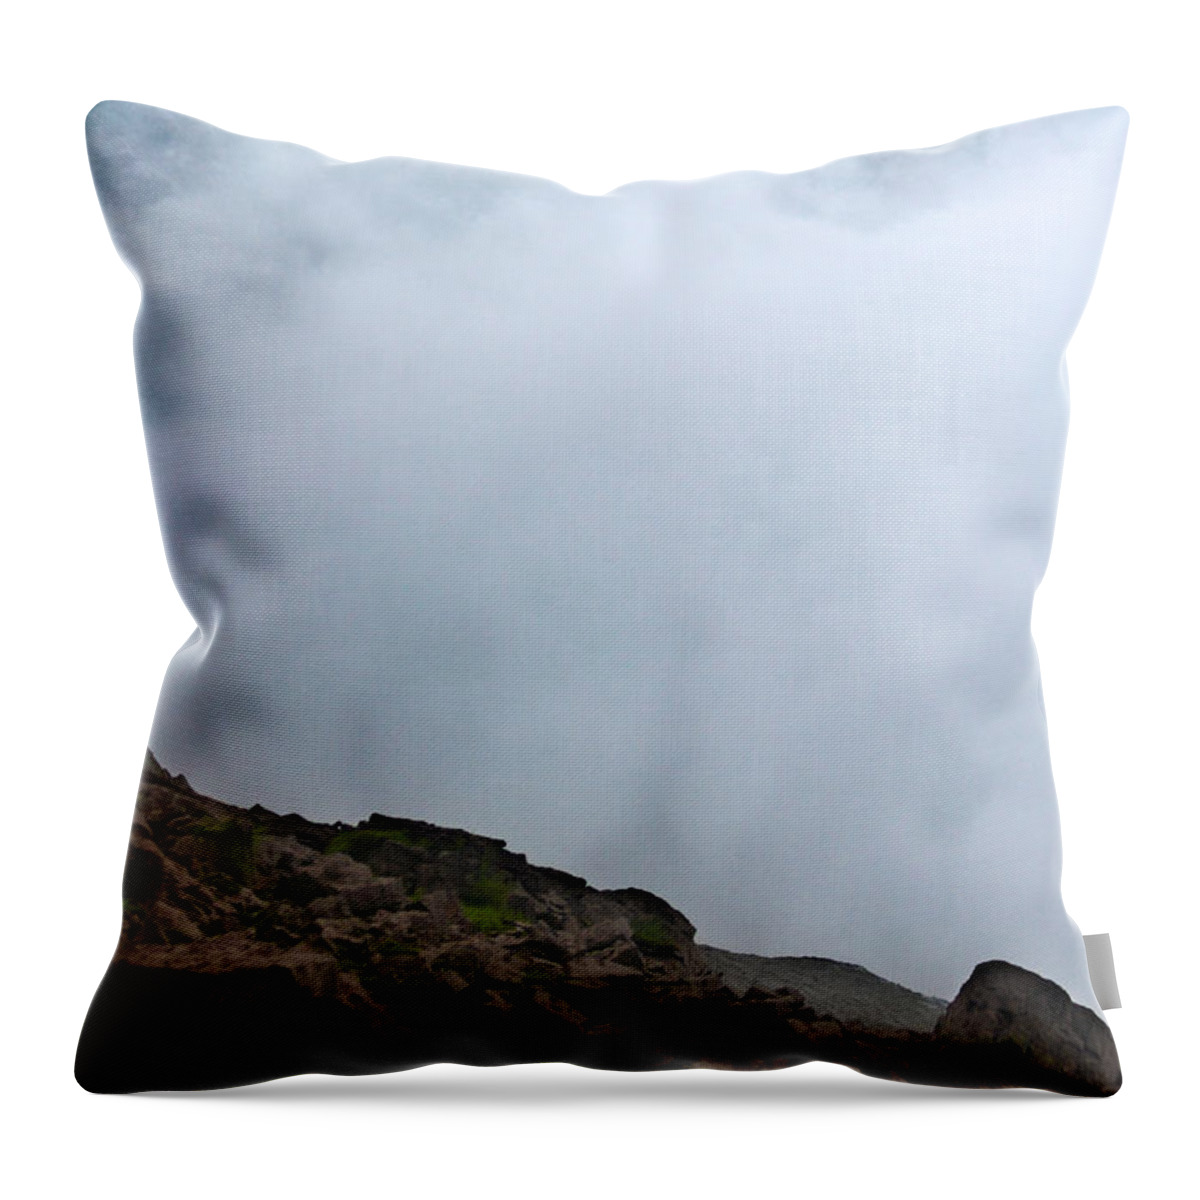 Water Throw Pillow featuring the photograph The Wall of Water by Dana DiPasquale